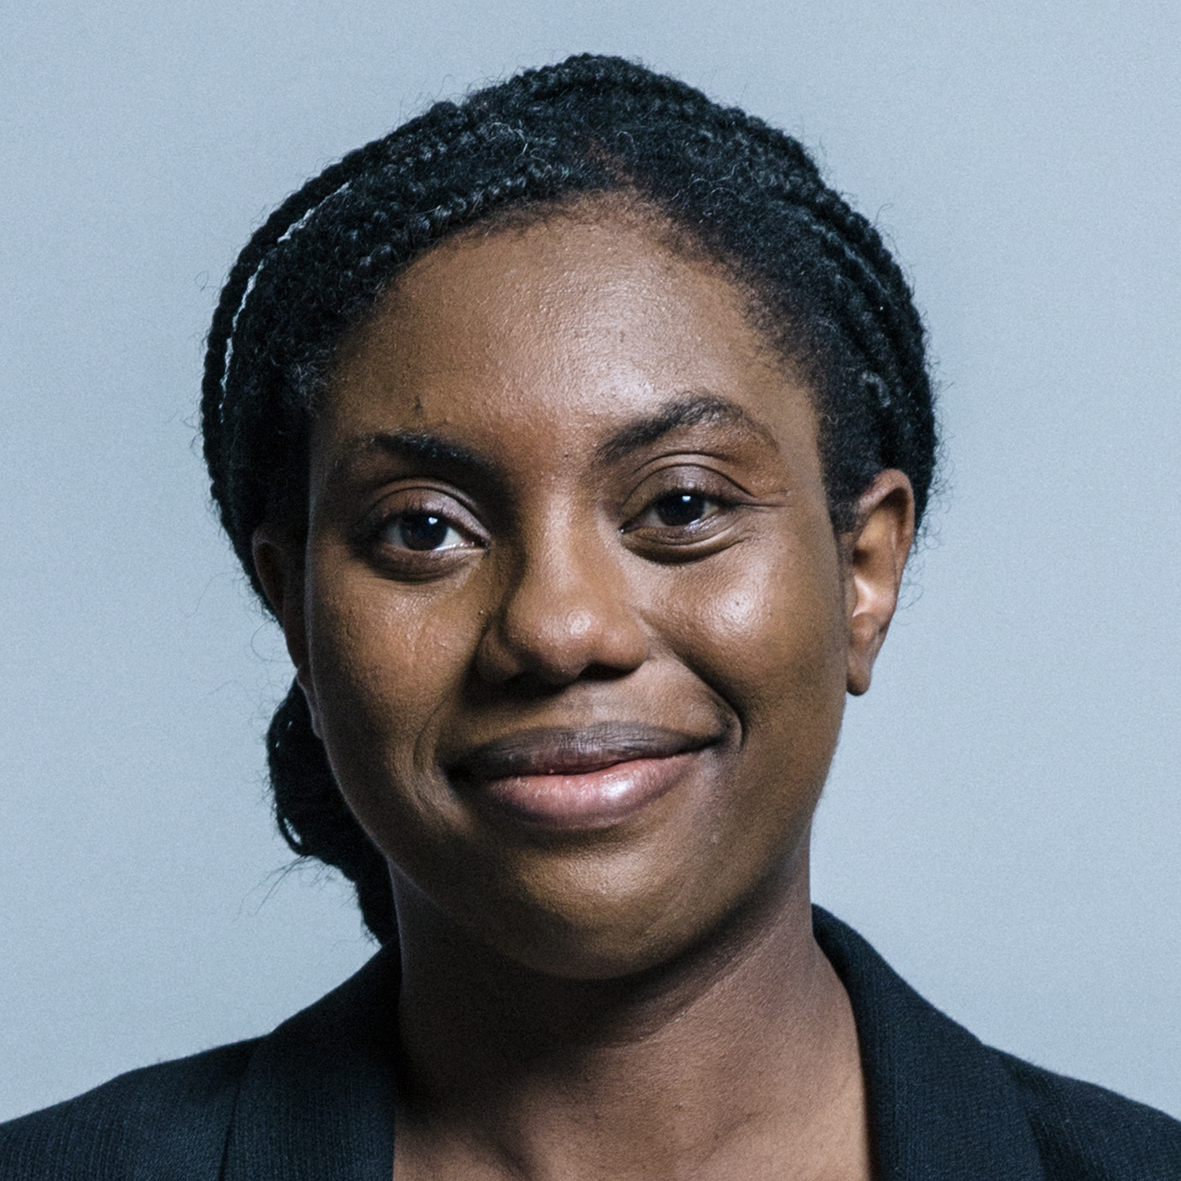 Kemi Badenoch locked in talks to lure MPs from rival candidates before final run-off